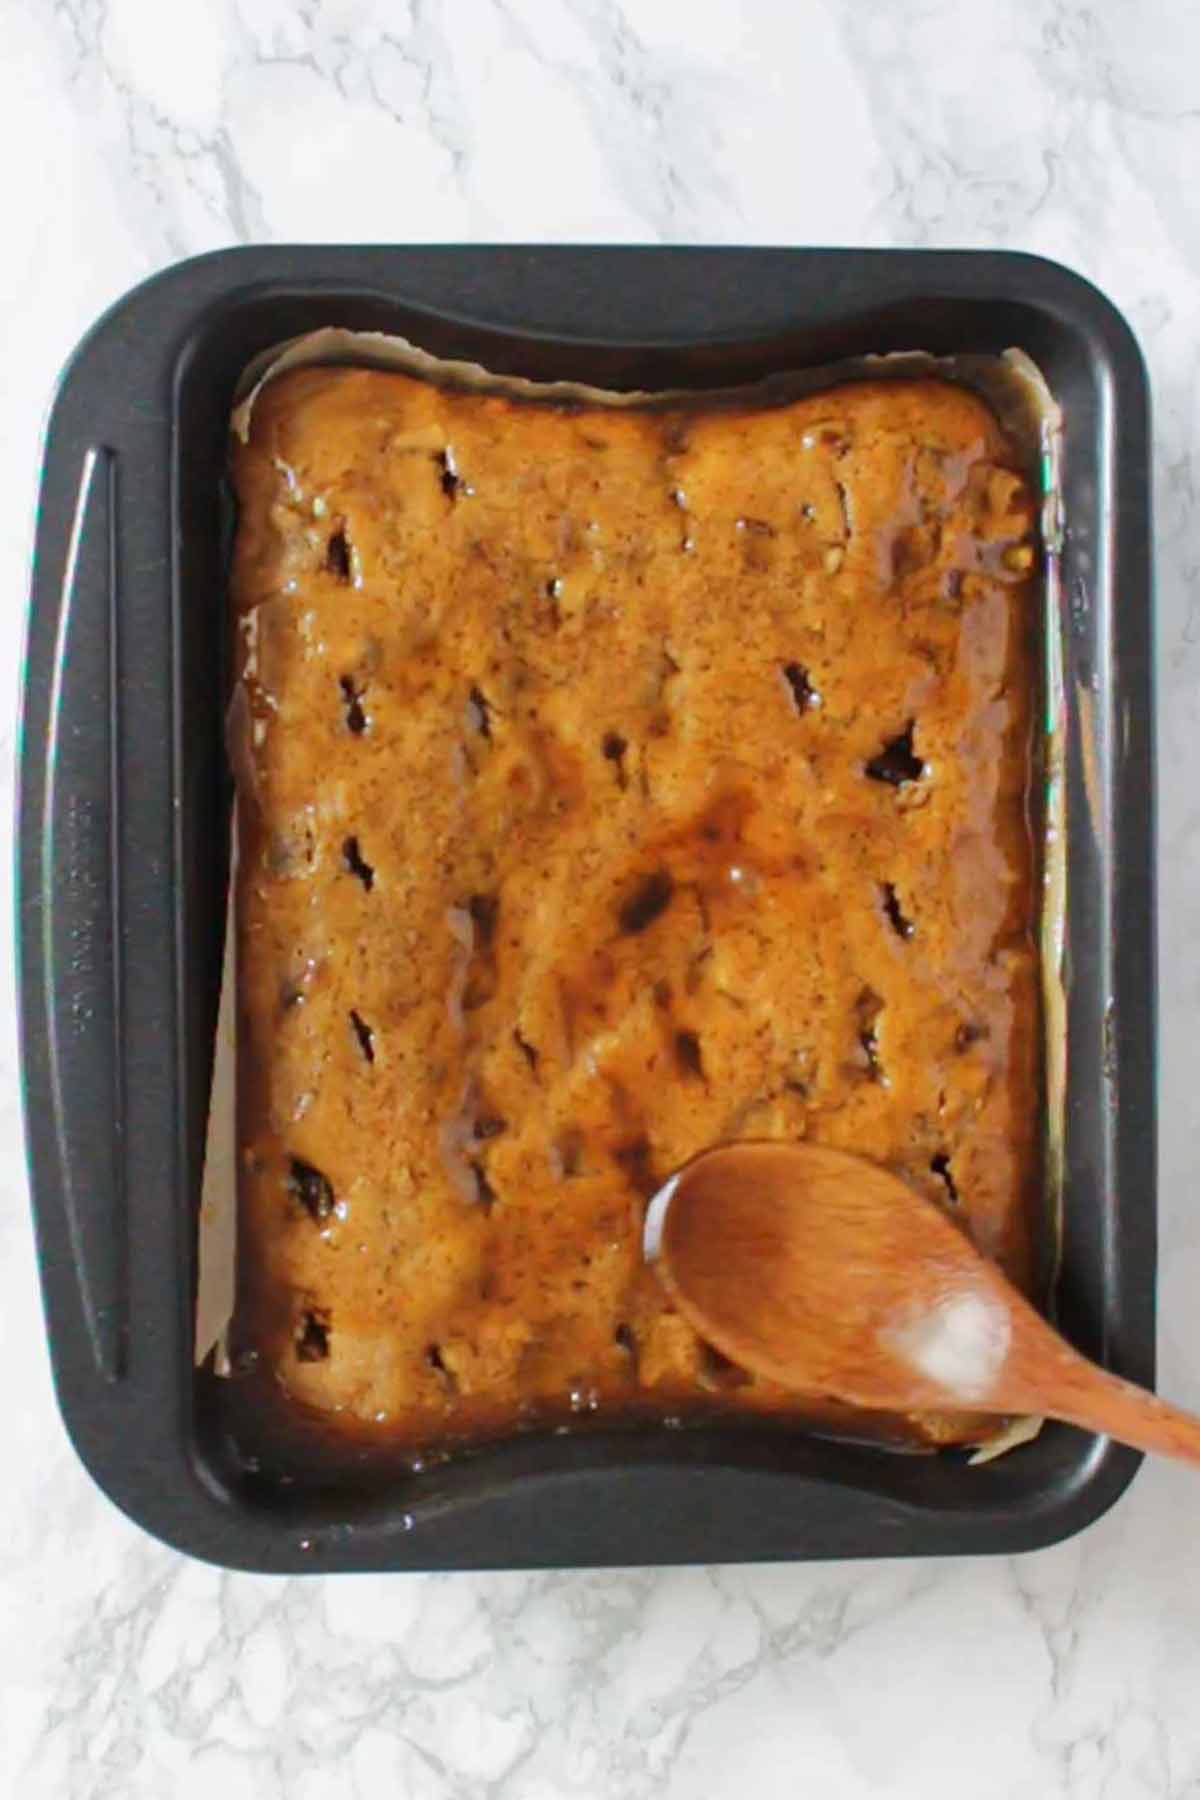 Baked Pudding With Sticky Sauce All Over It